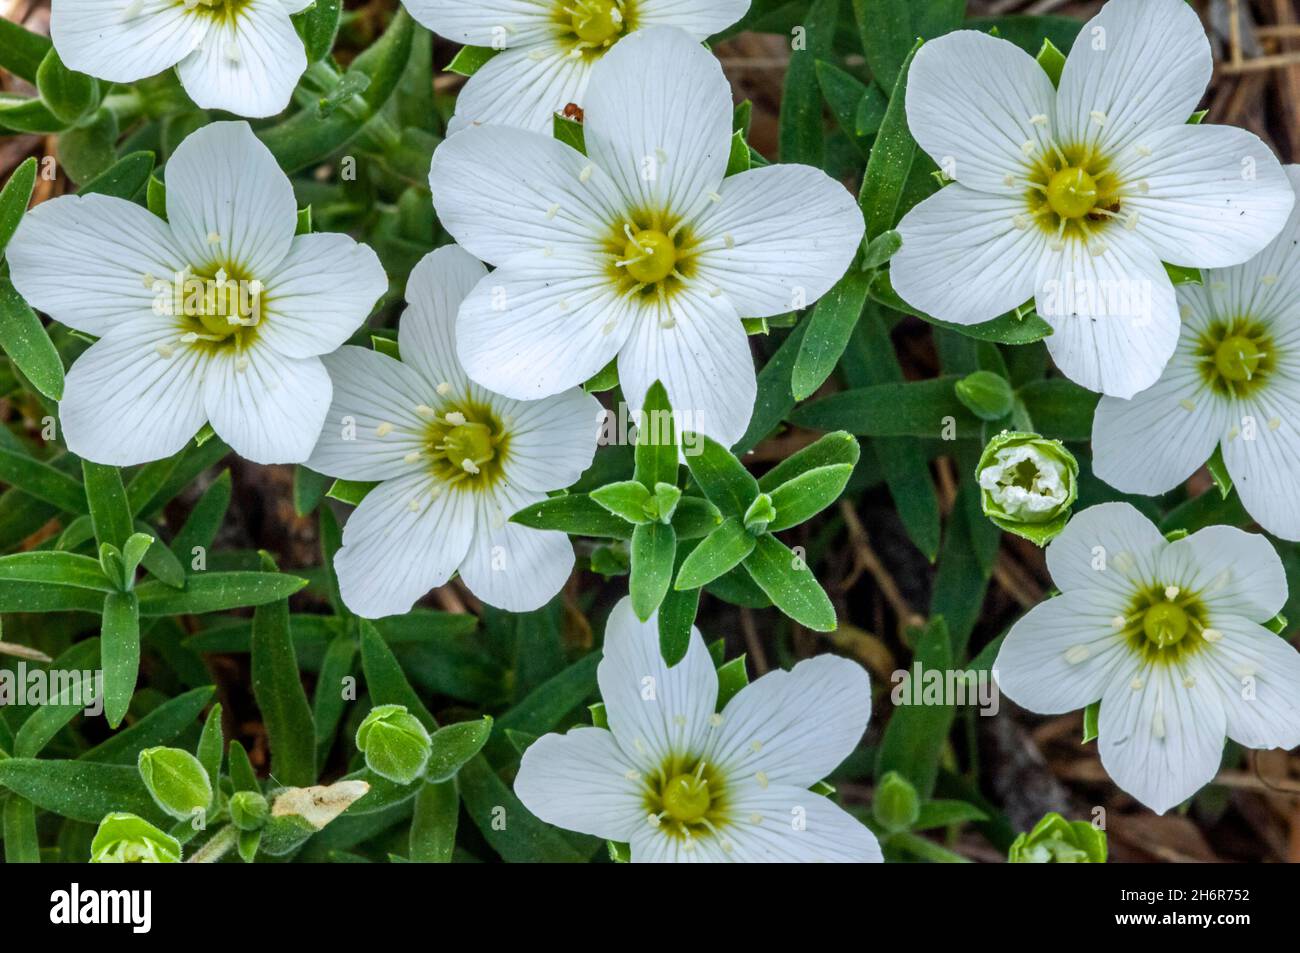 Mountain sandwort (Arenaria montana) in flower, native to mountainous regions of southwestern Europe, from the Pyrenees to Portugal Stock Photo